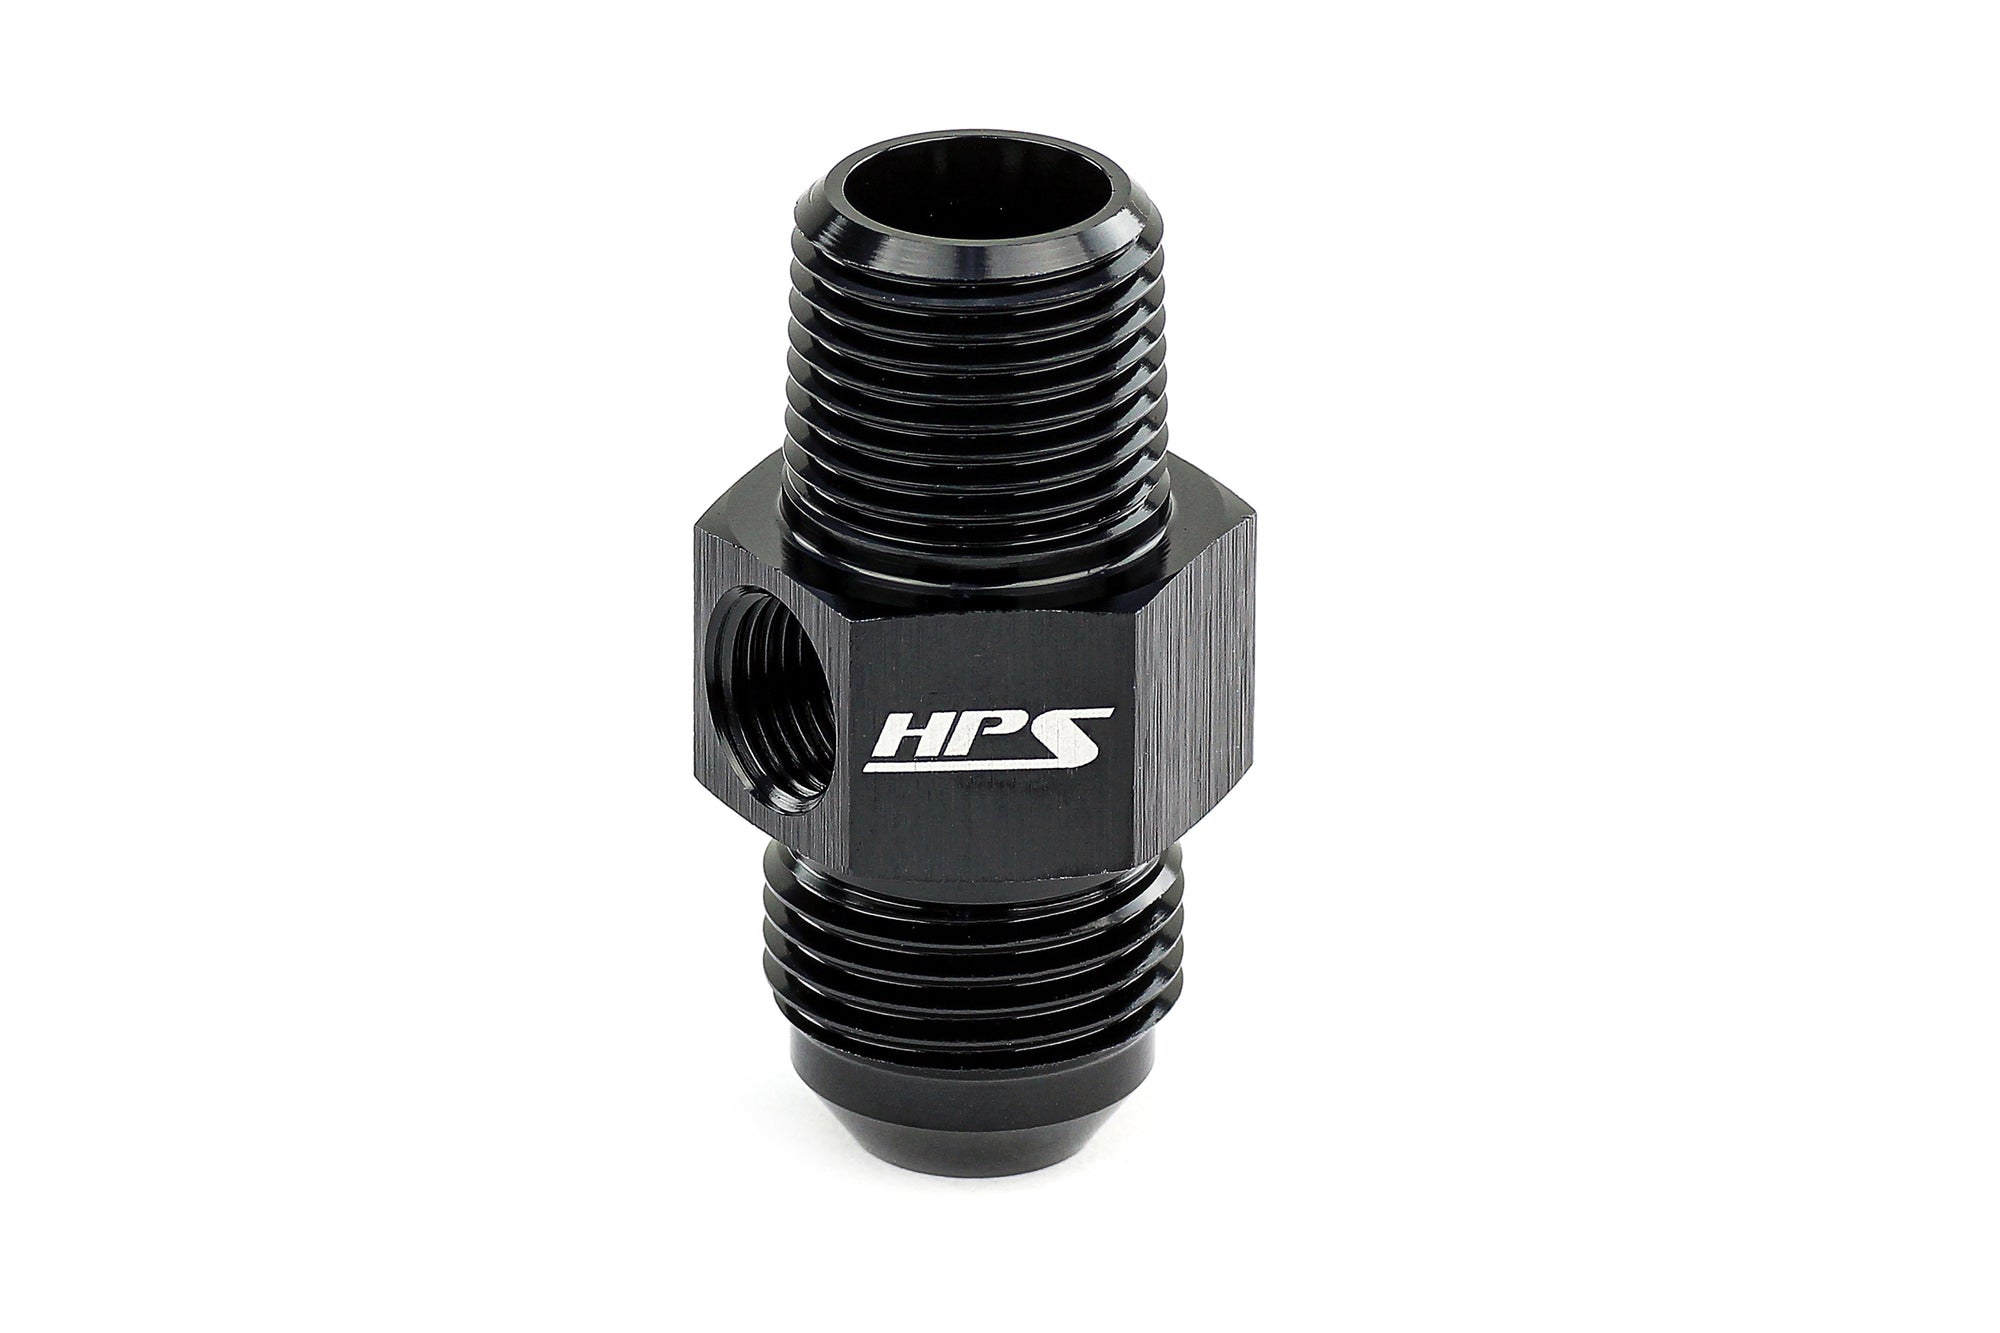 HPS Performance Black Aluminum AN Male to NPT Male Adapter with 1/8" NPT Female Port -4 -6 -8 3/8" 1/2"